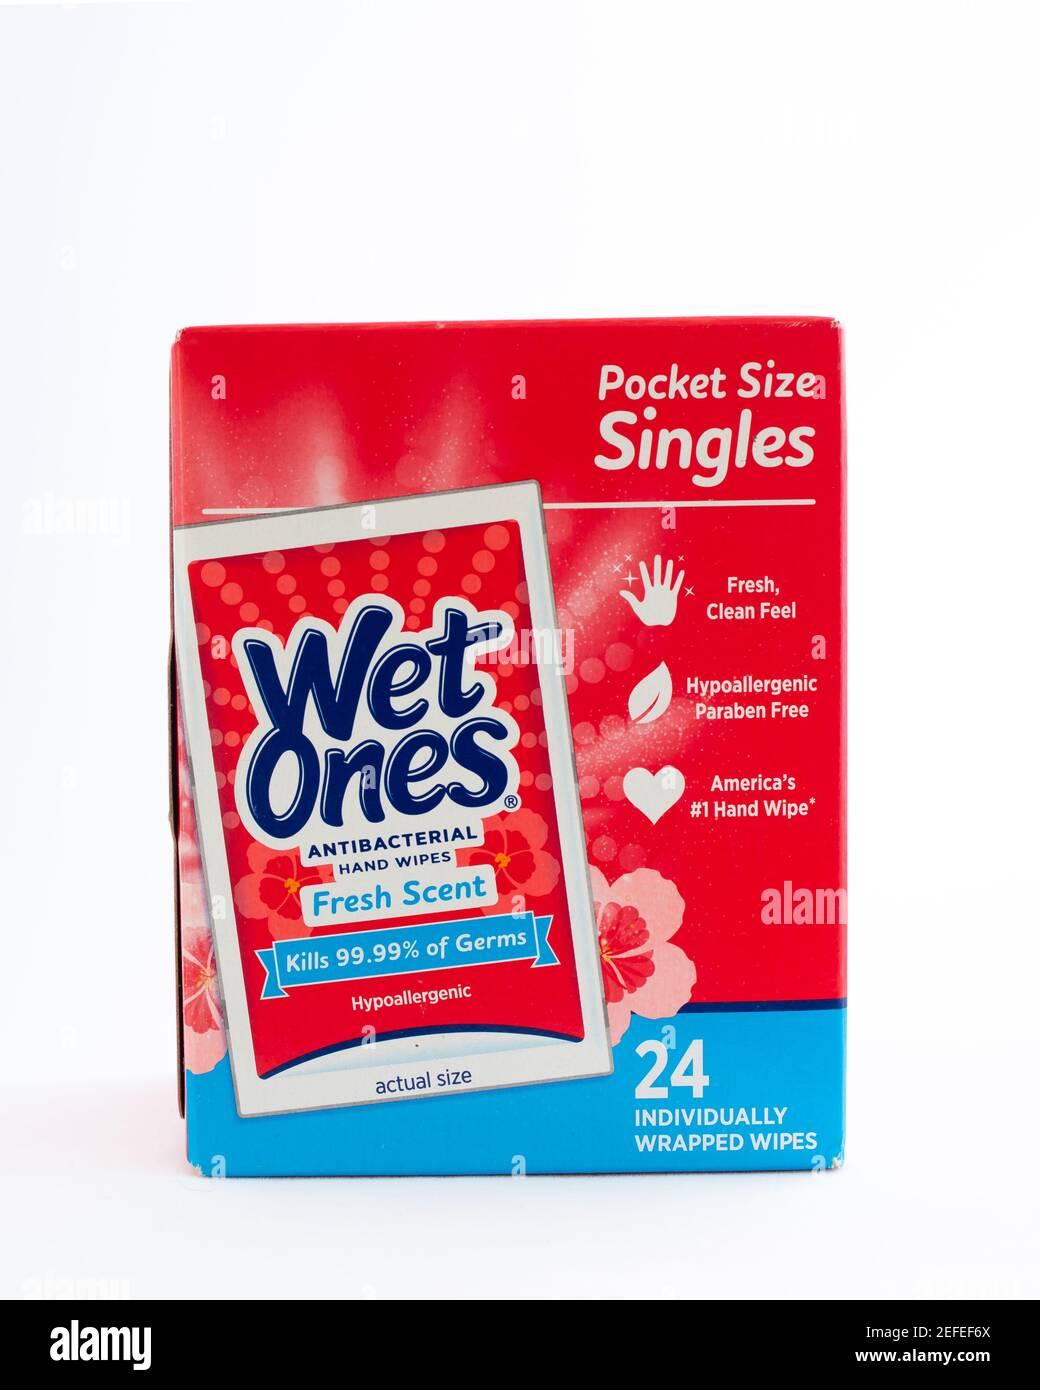 A box of 24 individually wrapped Wet Ones, antibacterial hand wipes that kill 99.99% of germs to prevent the spread of diseases. Stock Photo